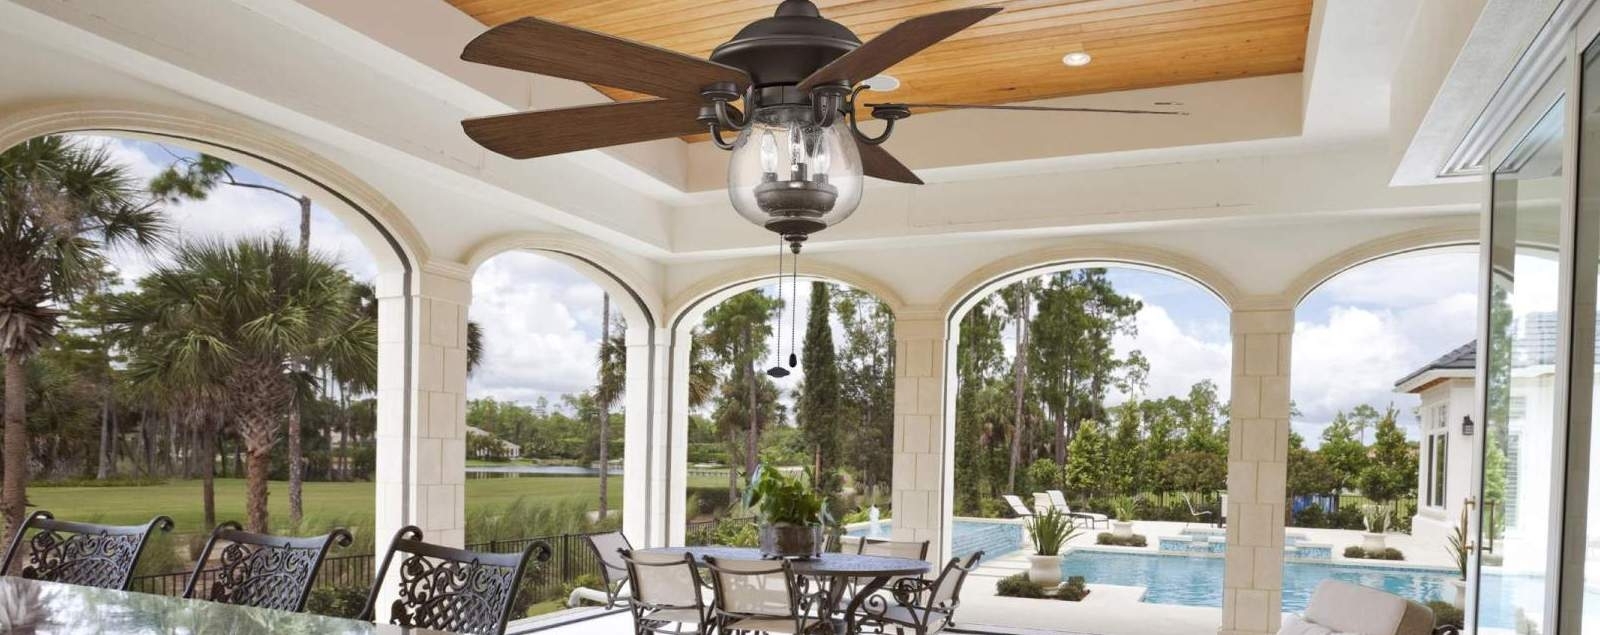 Outdoor Ceiling Fans For High Wind Areas